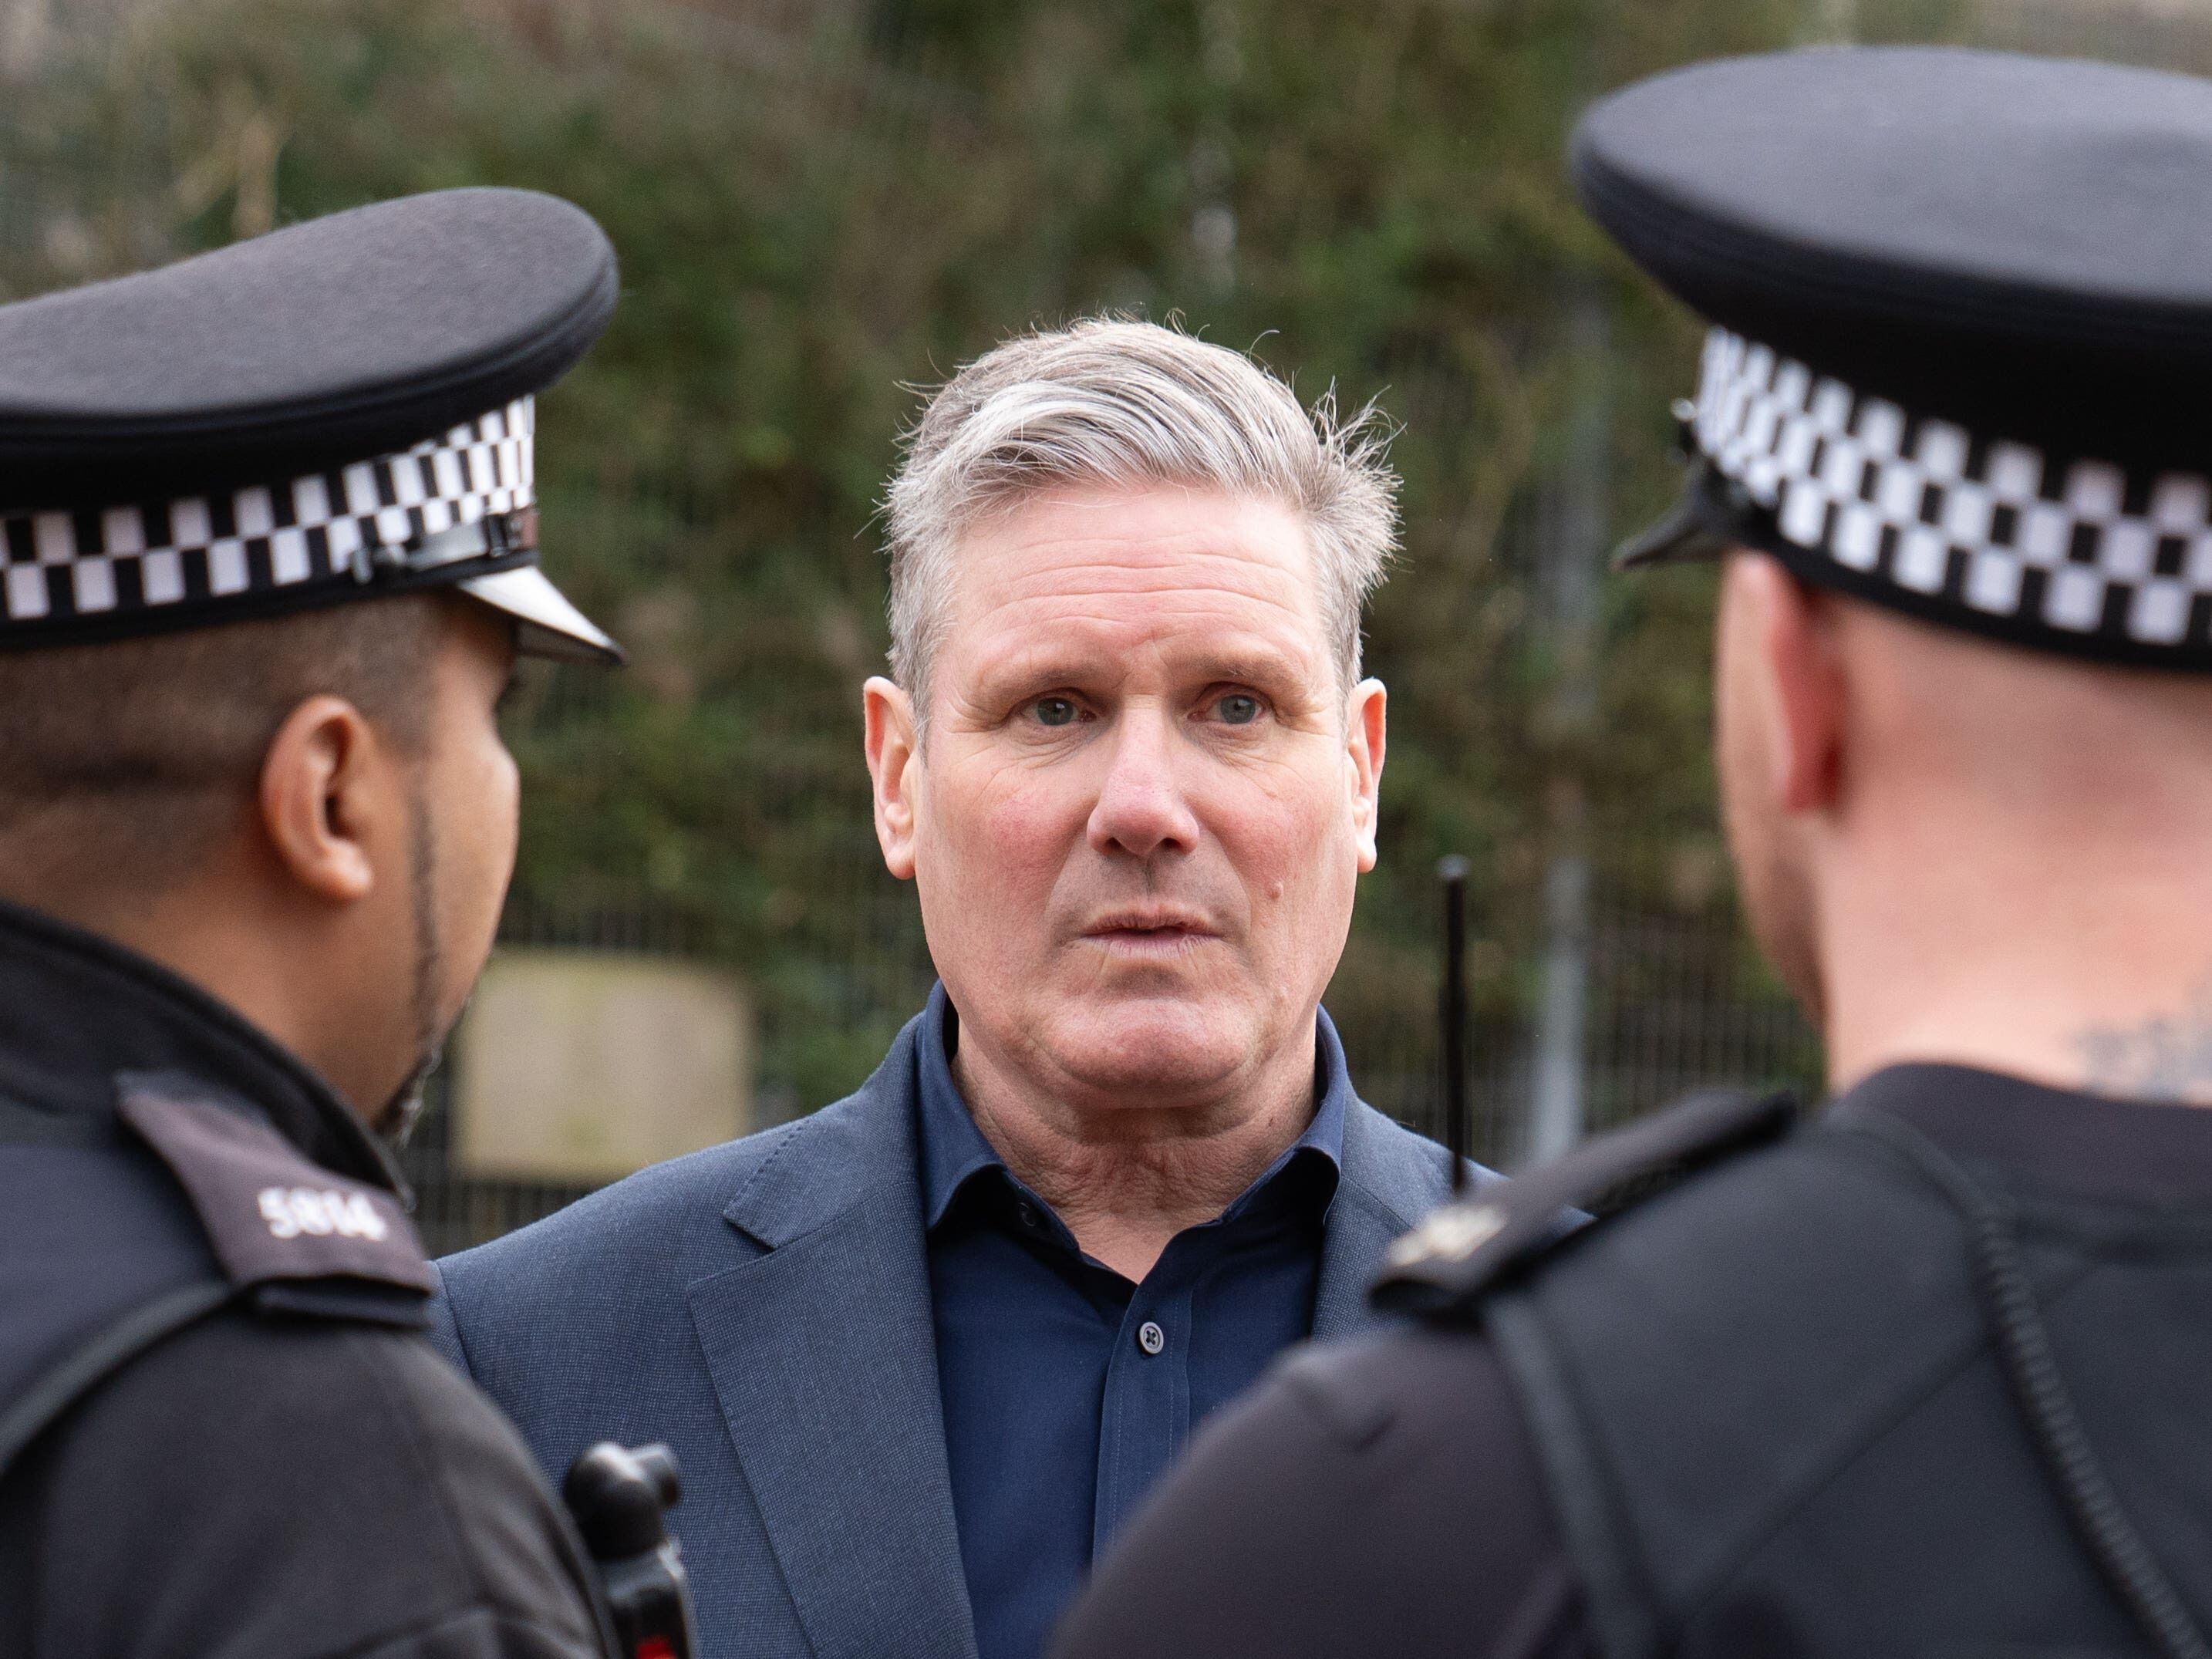 Starmer: Reducing knife crime will be ‘moral mission’ for Labour